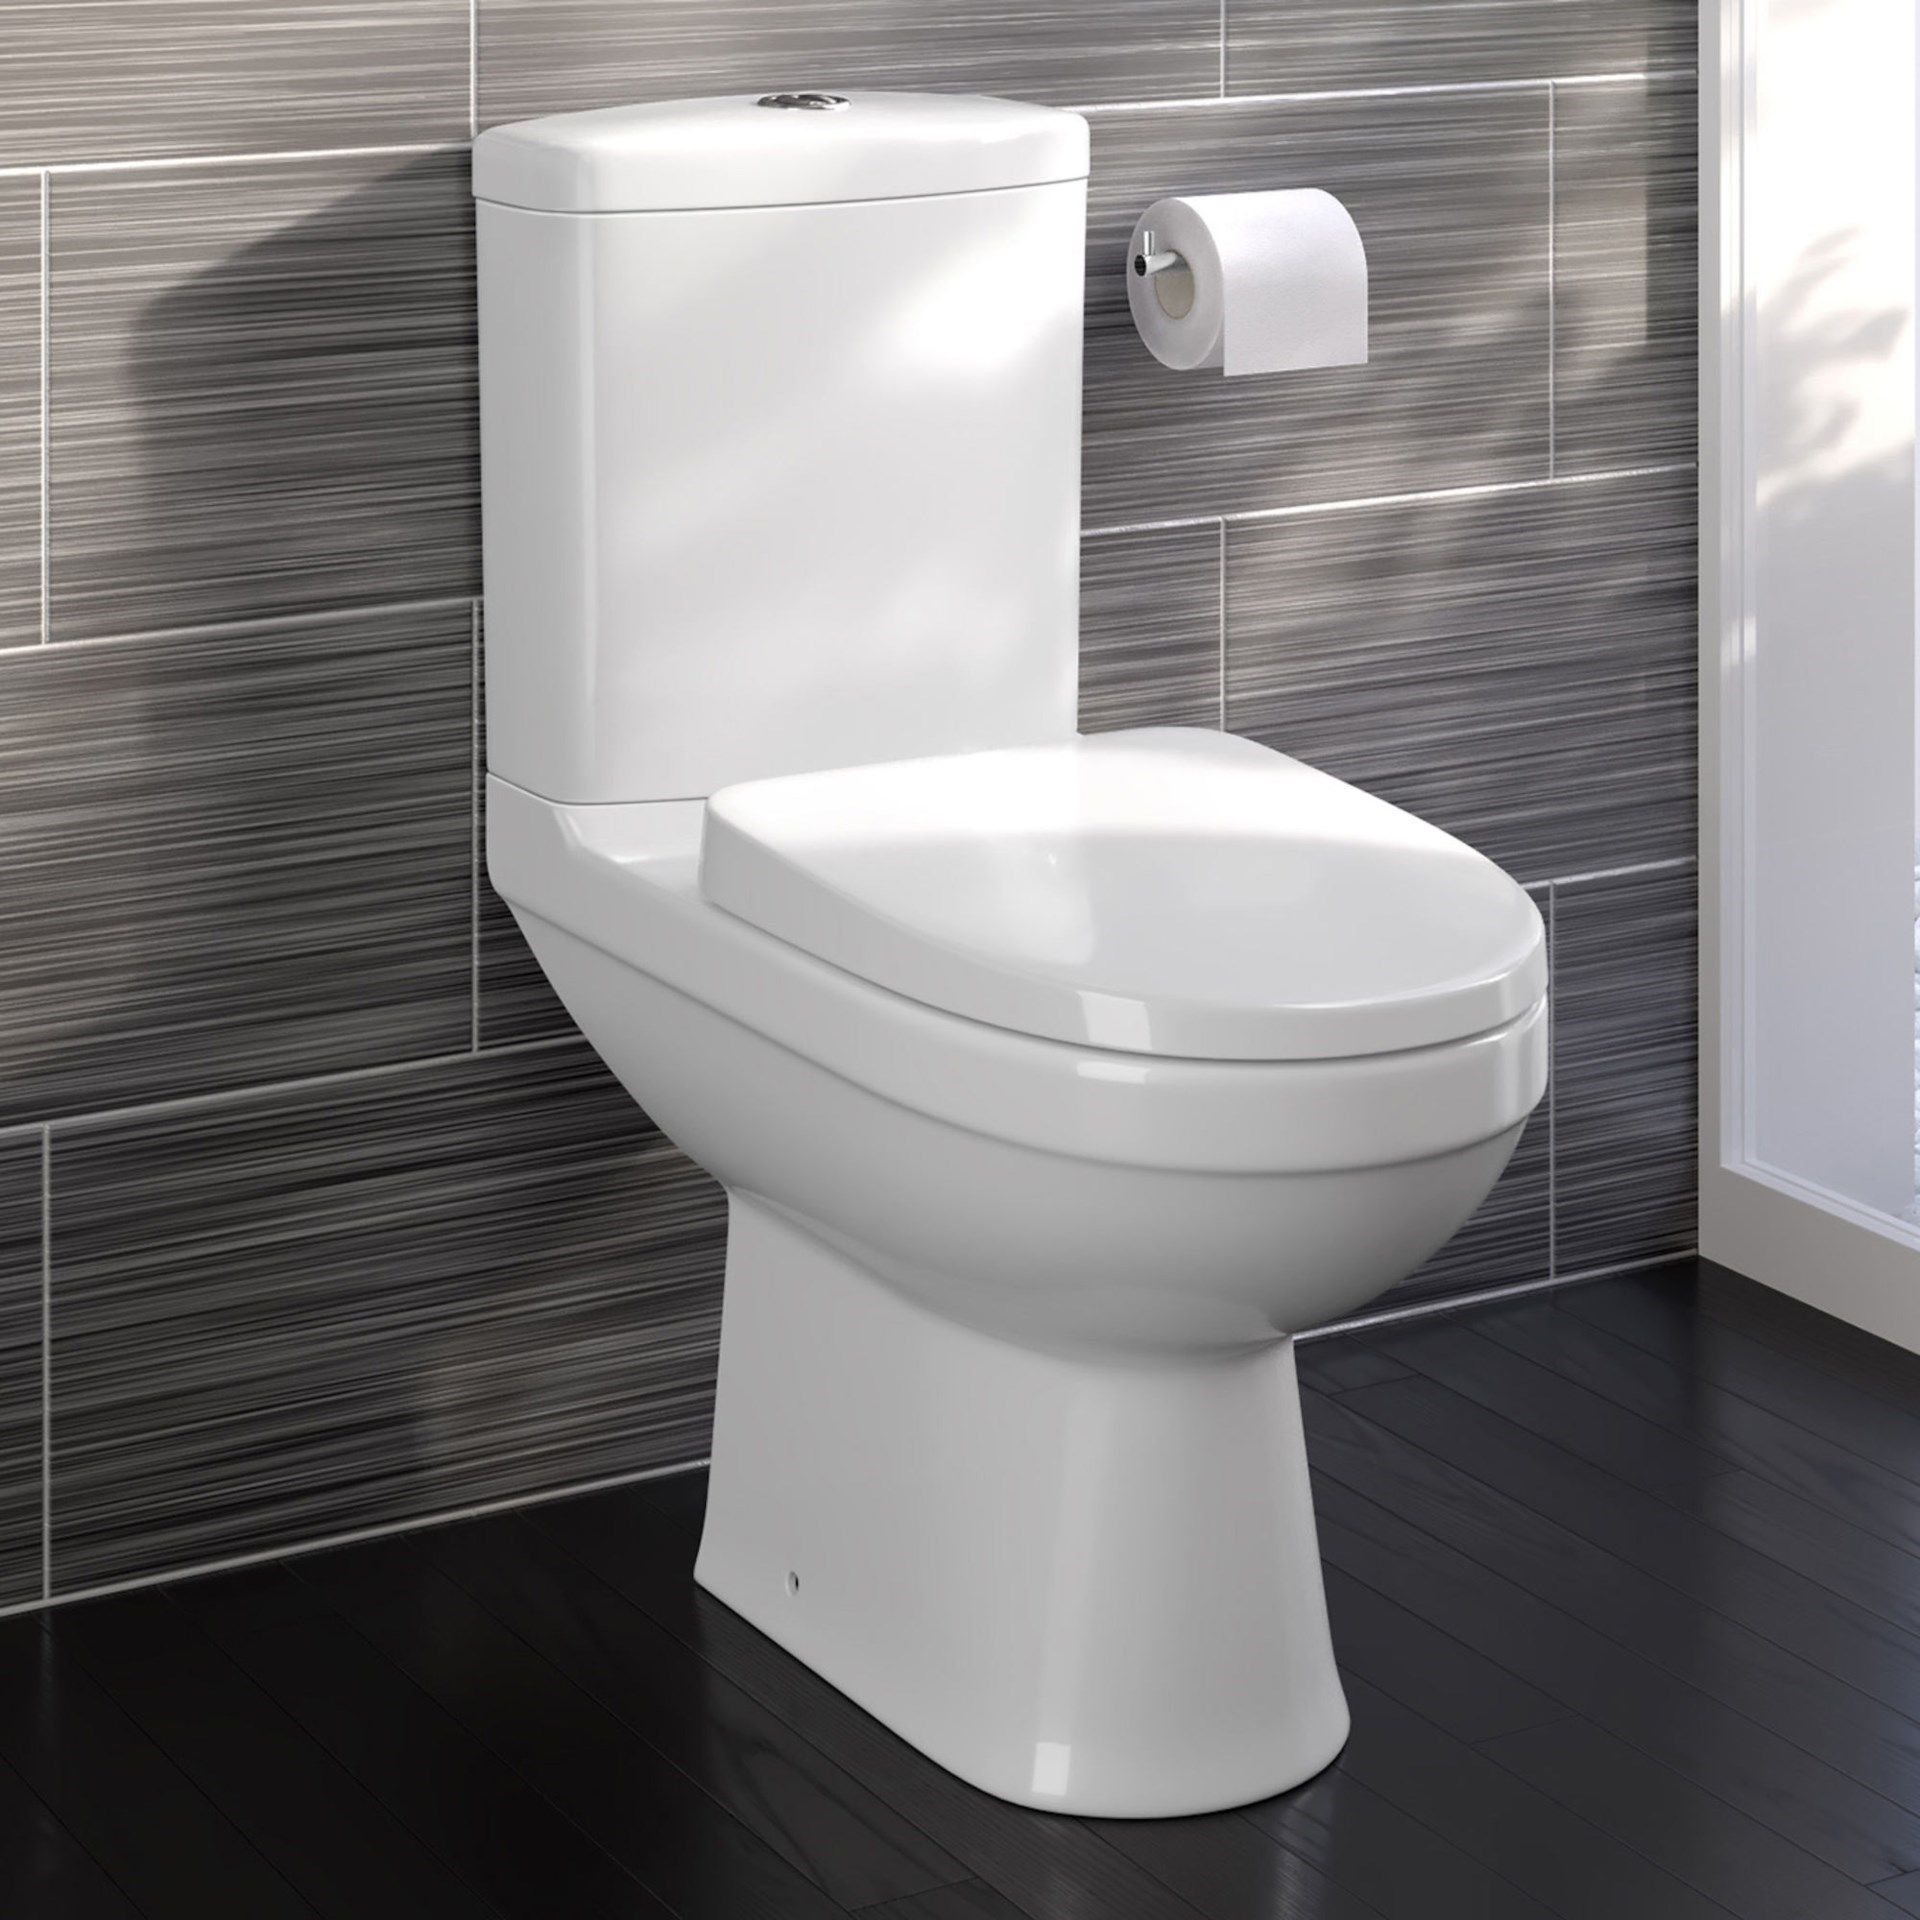 Sabrosa II Close Coupled Toilet & Cistern inc Soft Close Seat. RRP £349.99. Made from White Vi...